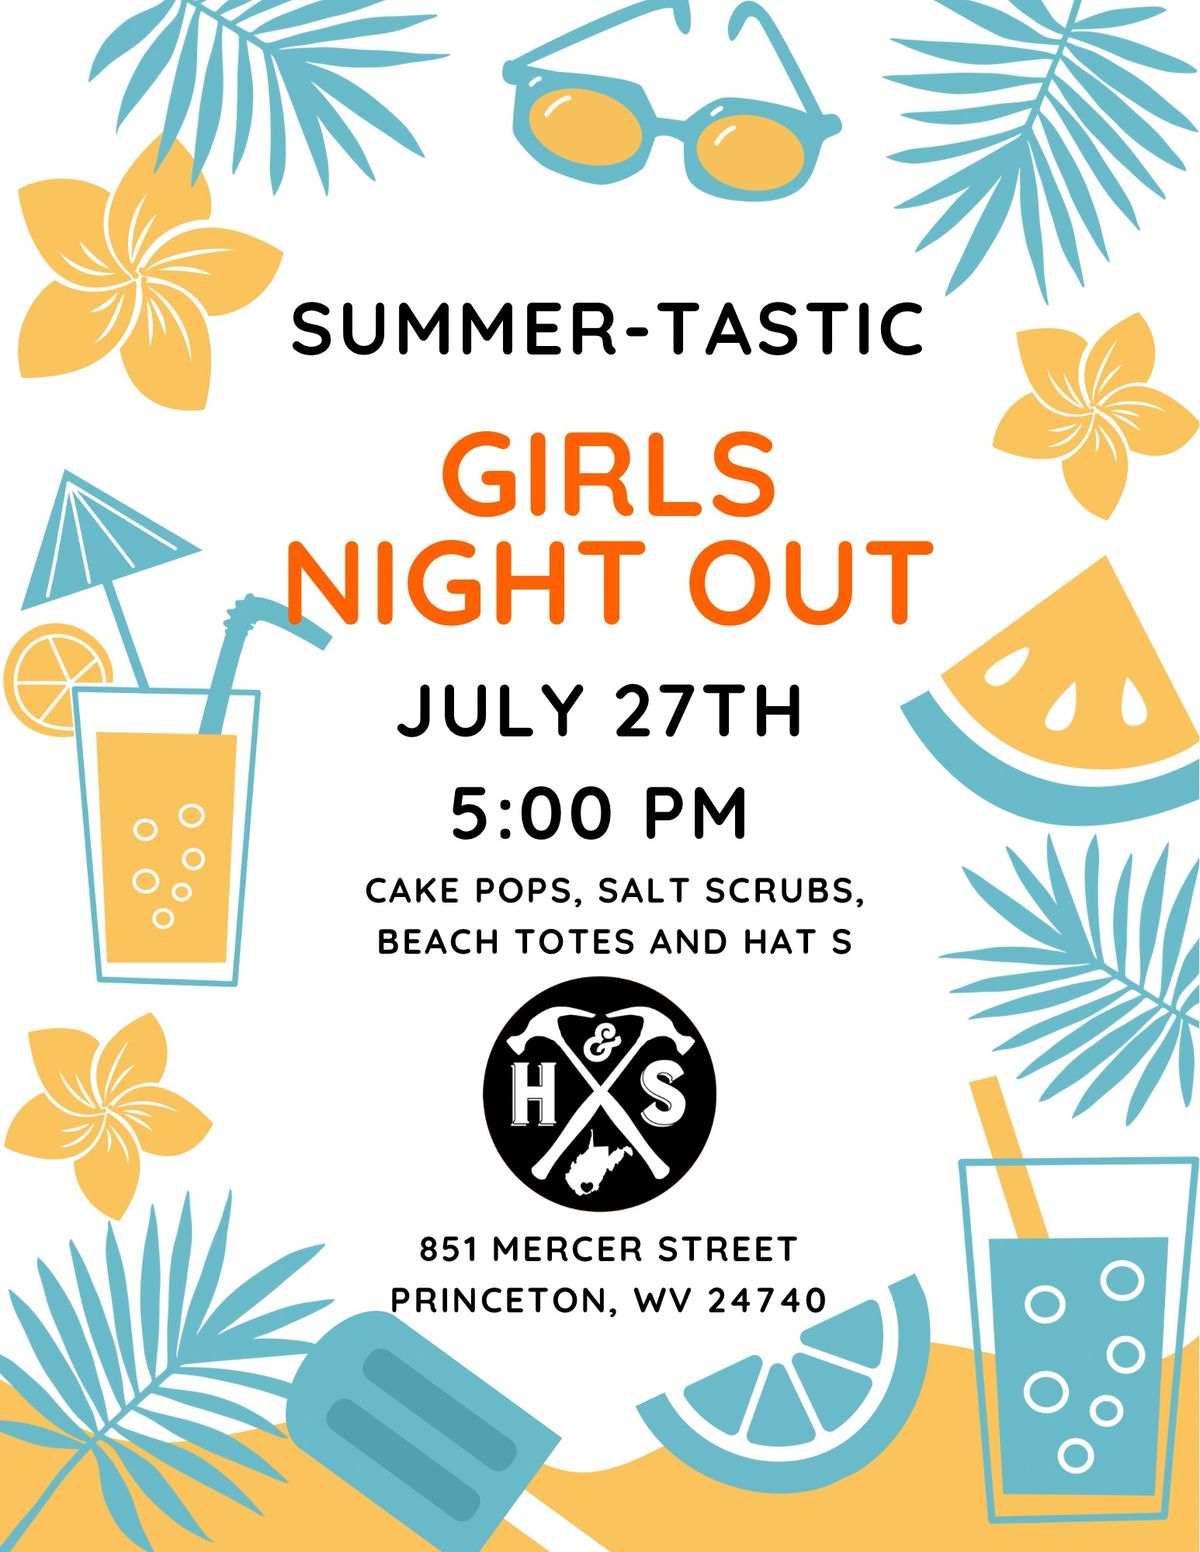 Summer-tastic Girls Night Out